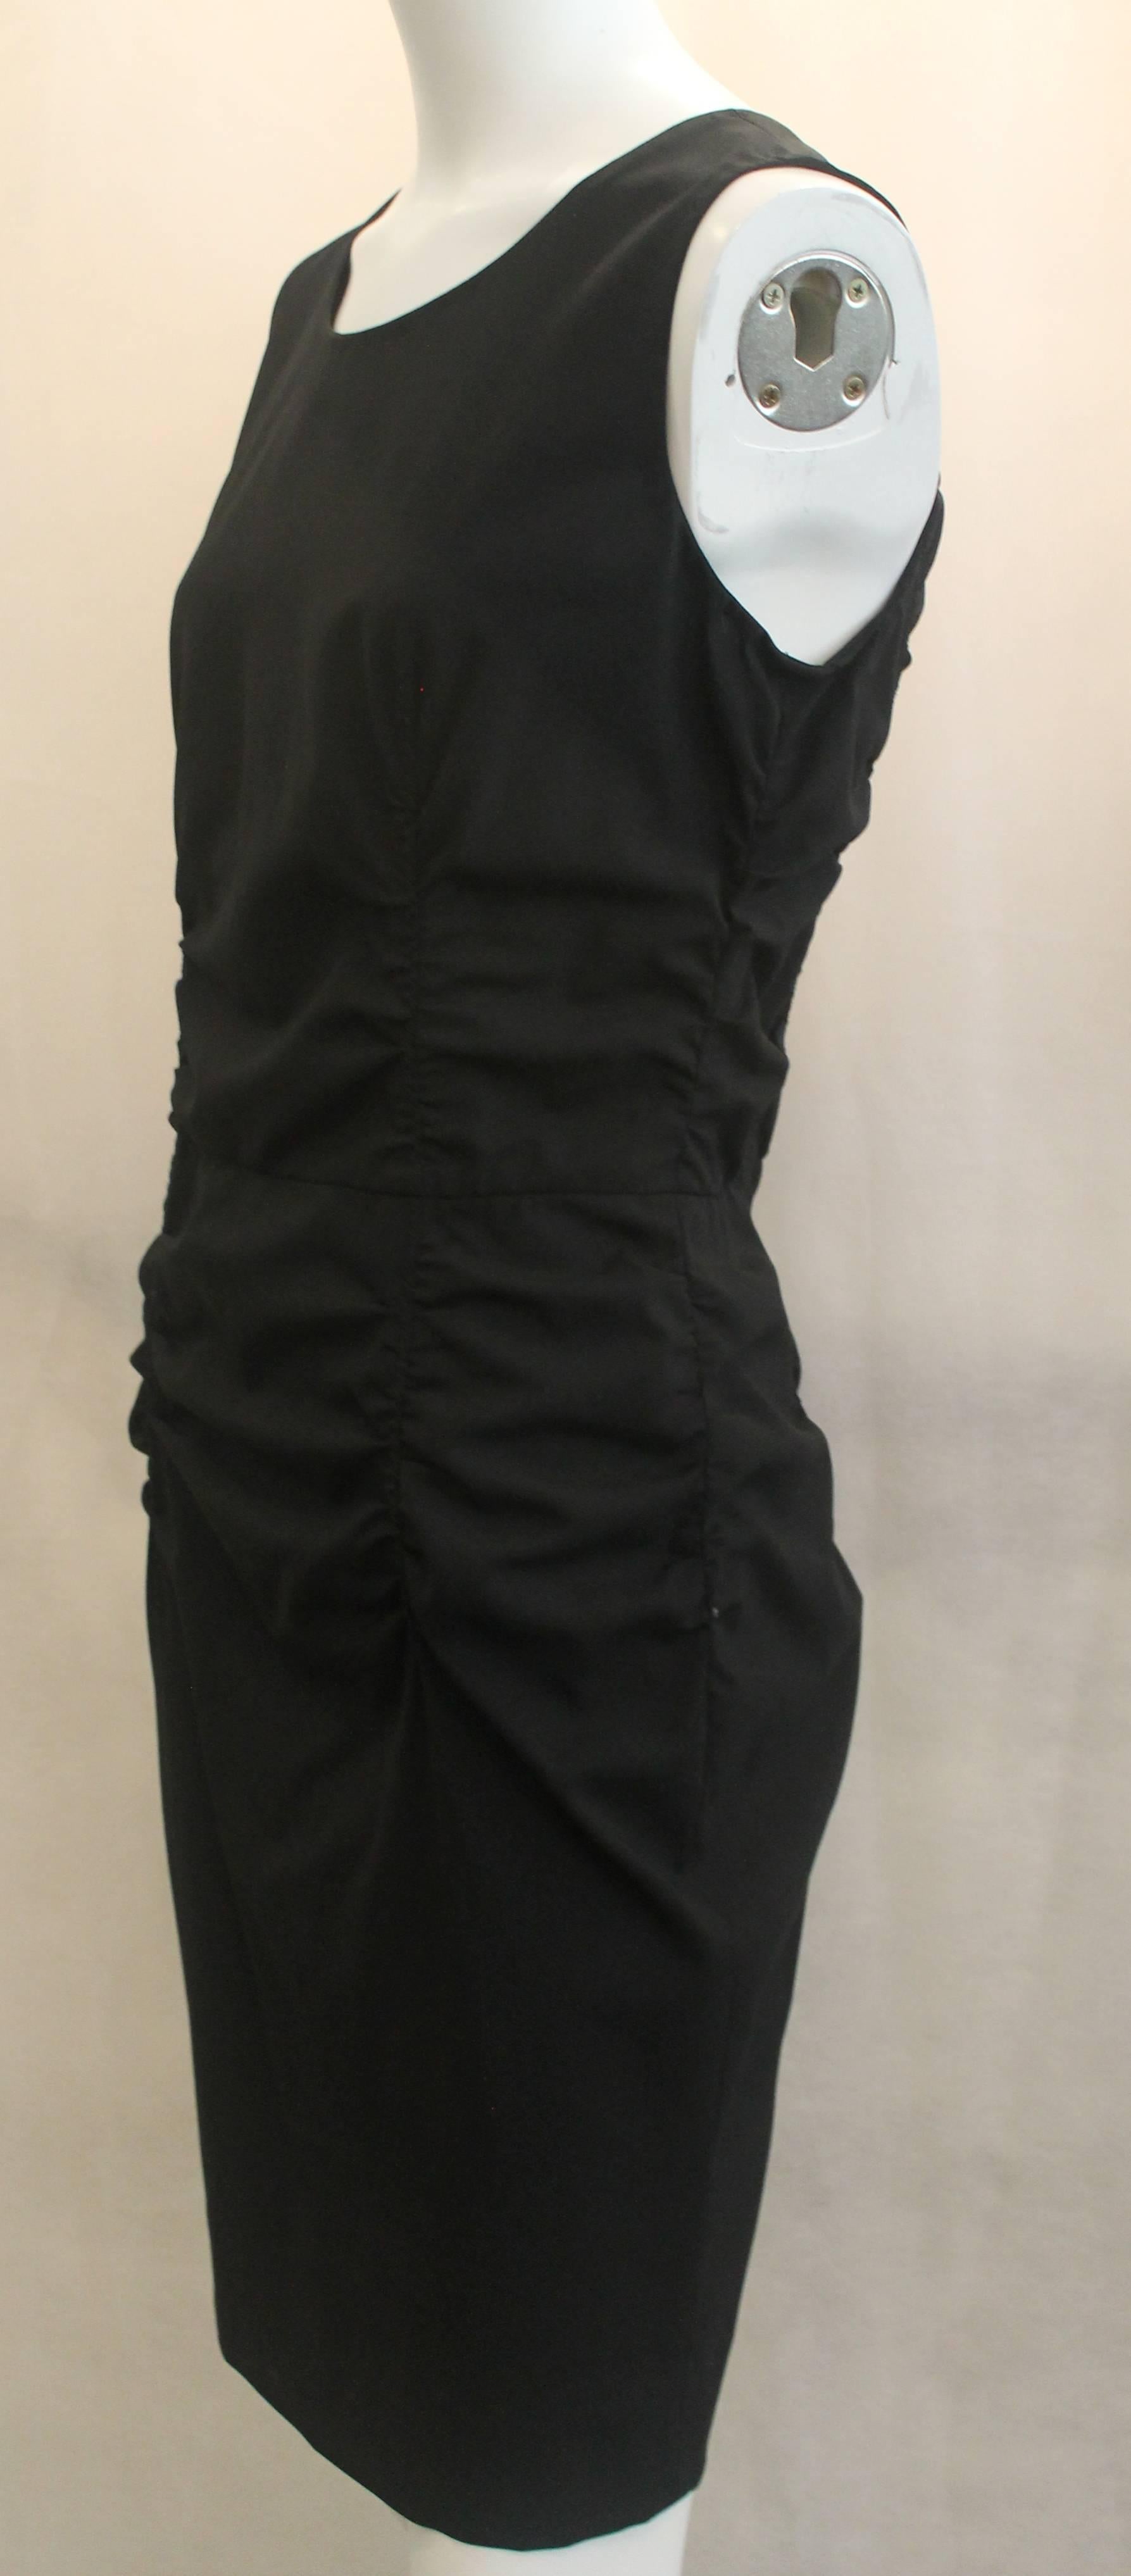 Prada Black Silk Blend Ruched Sleeveless Dress - 44. This fitted sleeveless dress is black with ruching on the sides and back. It is in good condition with a small white stain on its side and some marks on the bottom. There is a small beige stain by